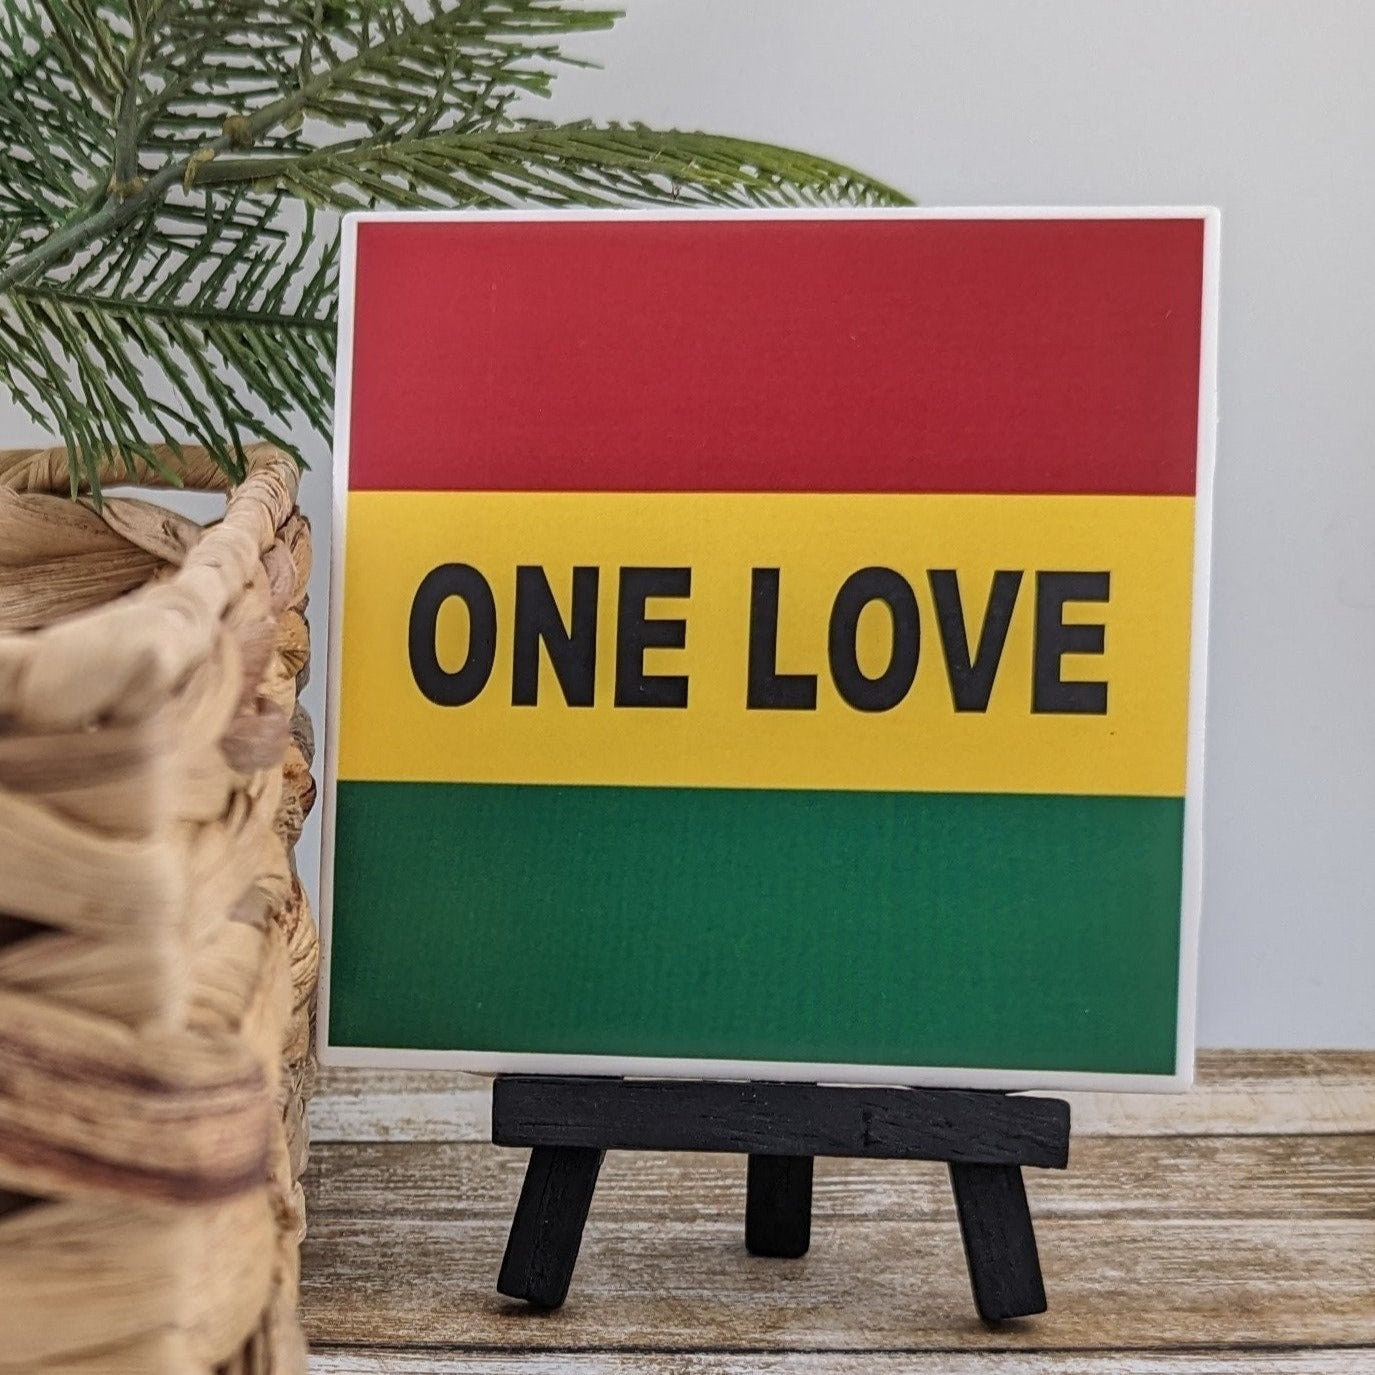 One Love Mini Rasta Easel Sign - easel included, your color choice